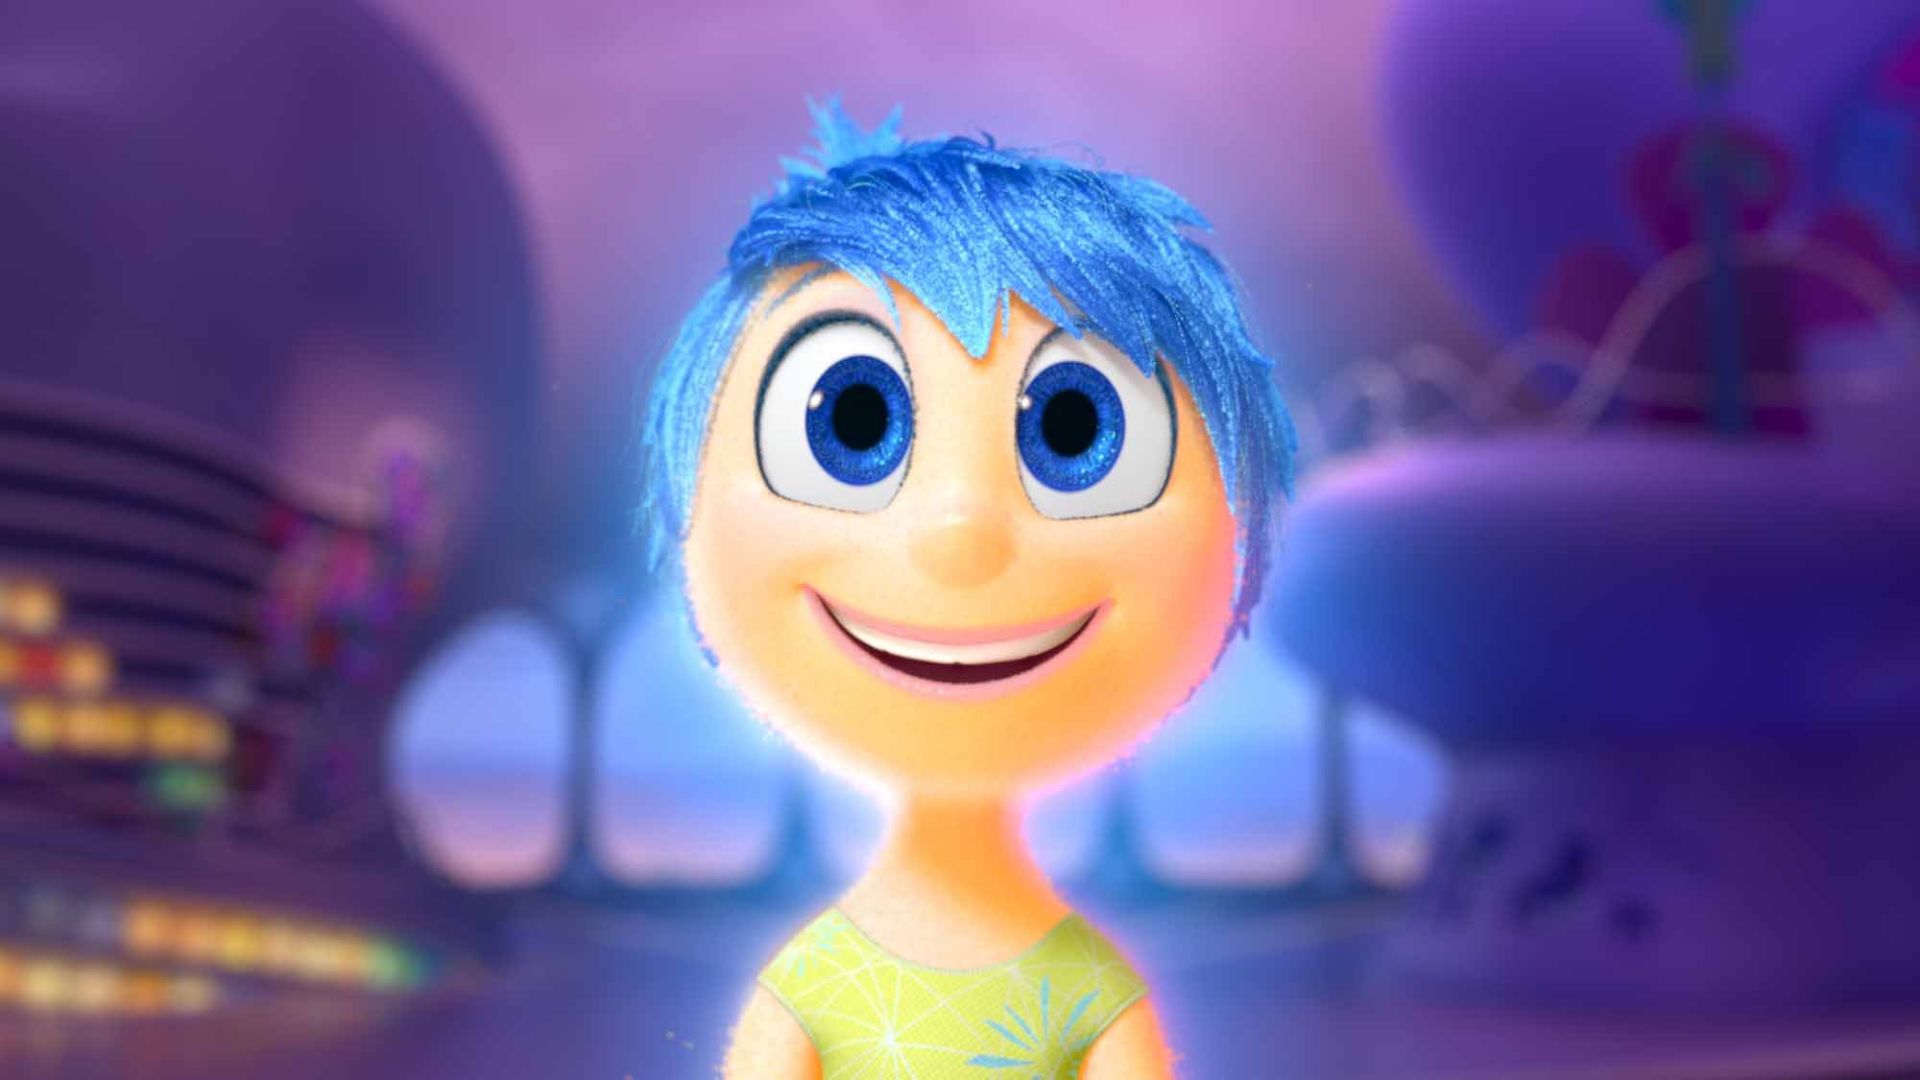 inside out the movie quotes